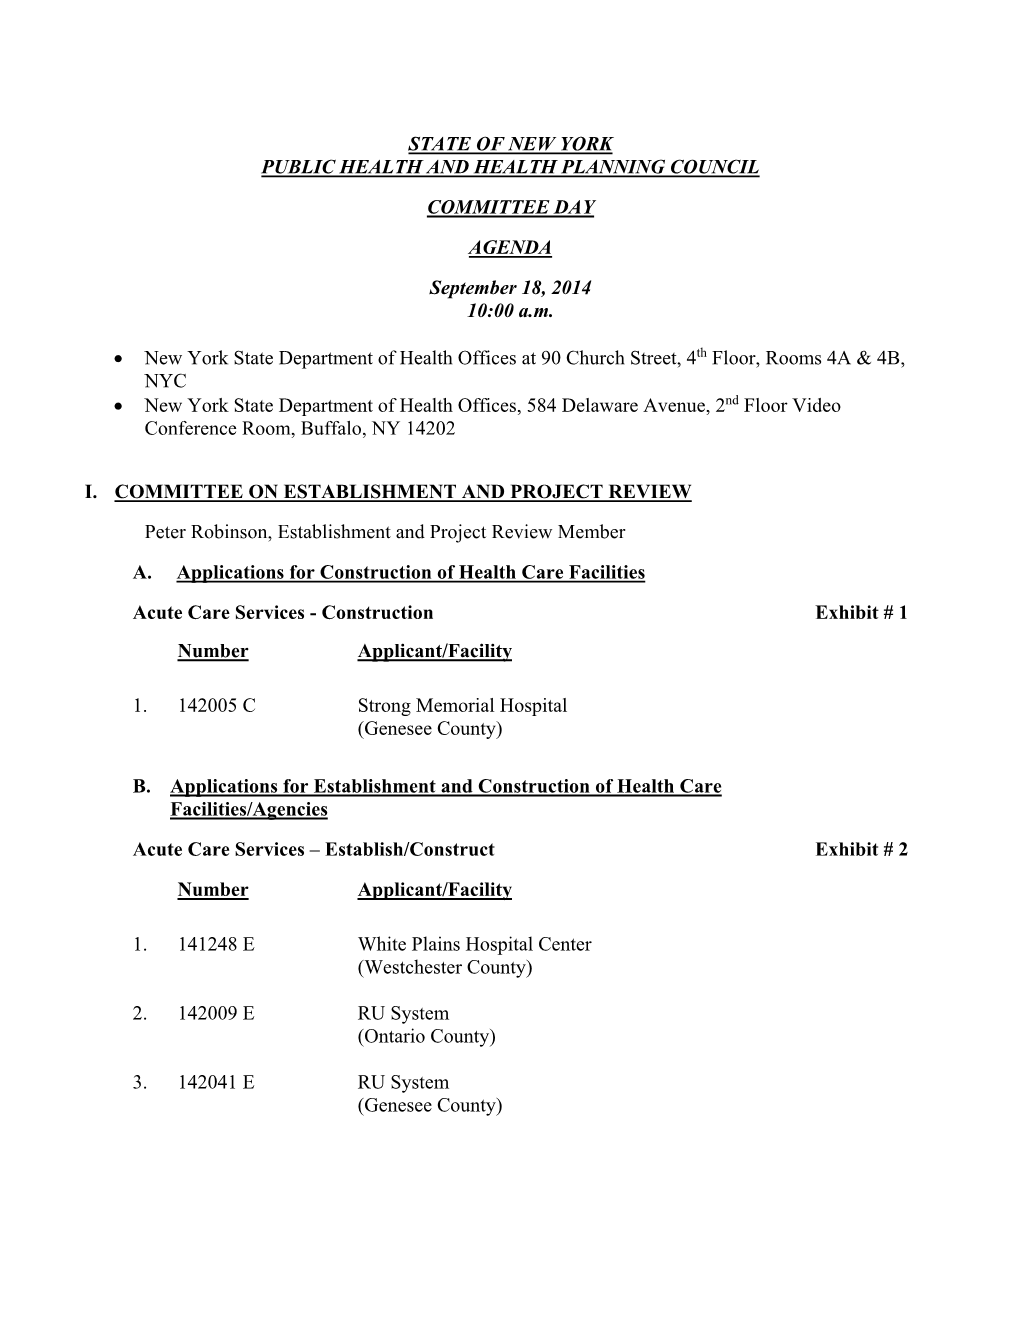 Public Health and Health Planning Council Committee Day Agenda